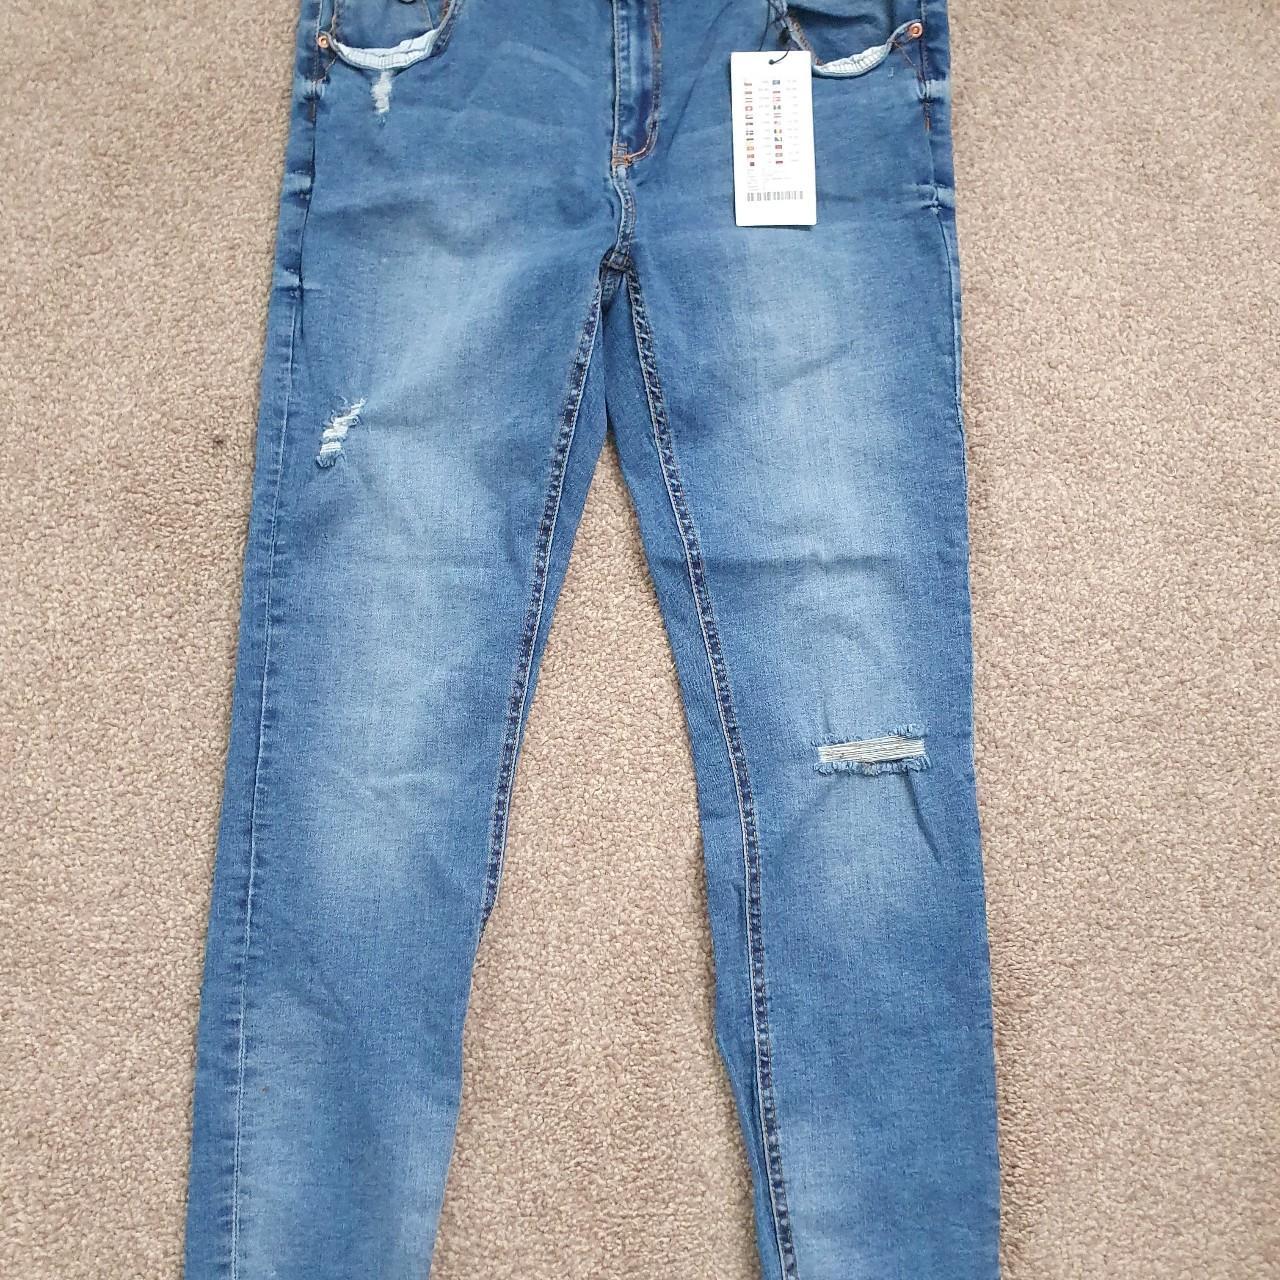 Womens Ripped Jeans Size 32 Brand New These skinny... - Depop